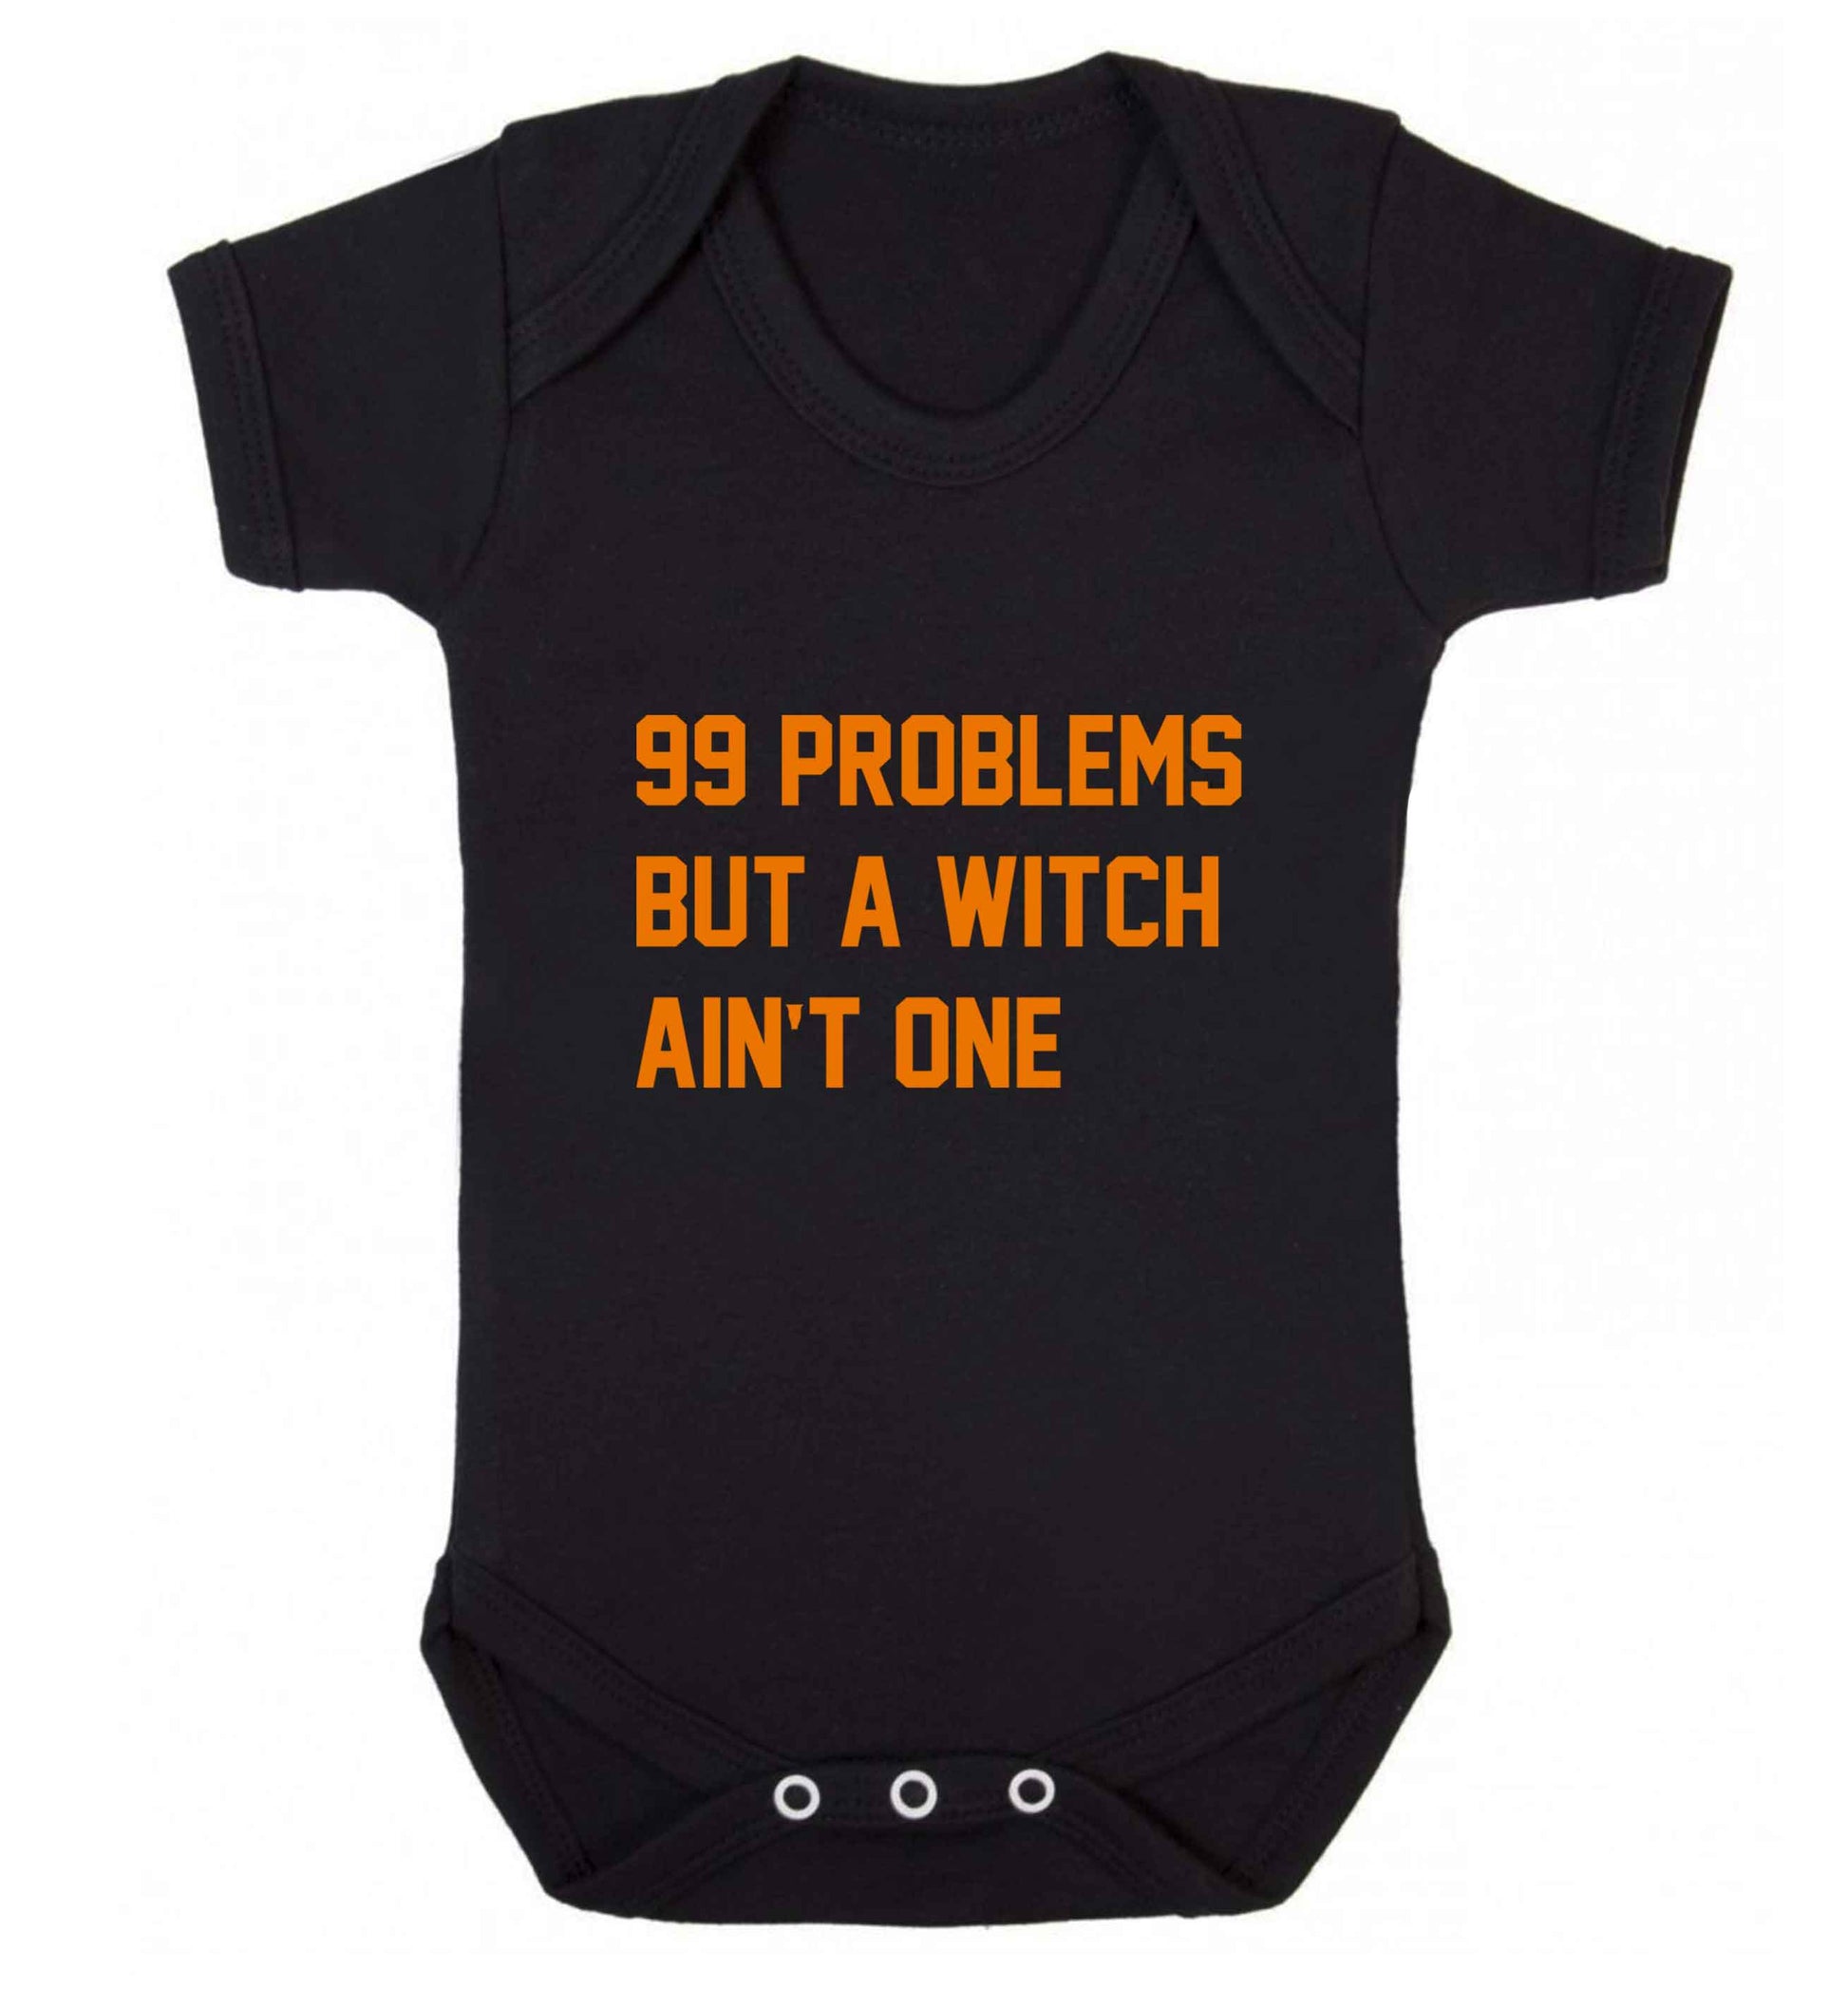 99 Problems but a witch aint one baby vest black 18-24 months